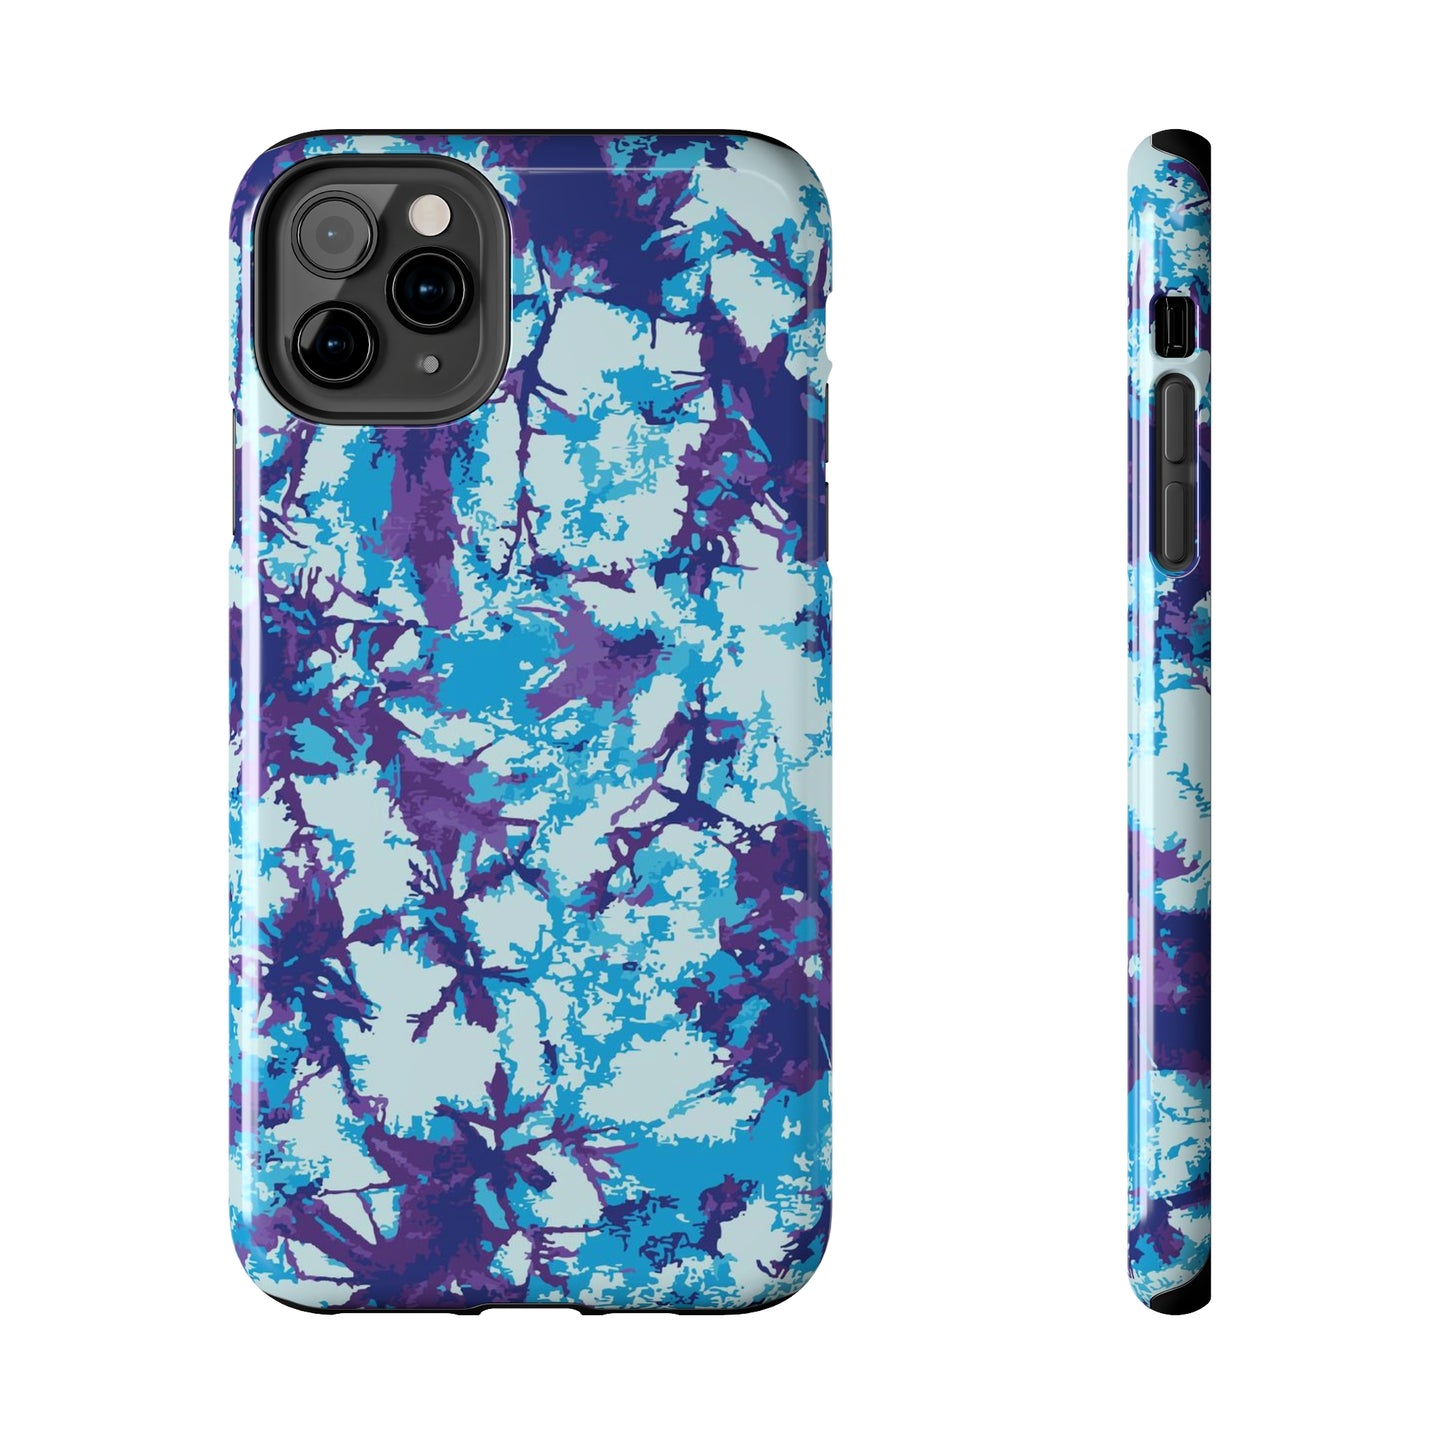 Violet & Blue Tie Dye Only / iPhone Case